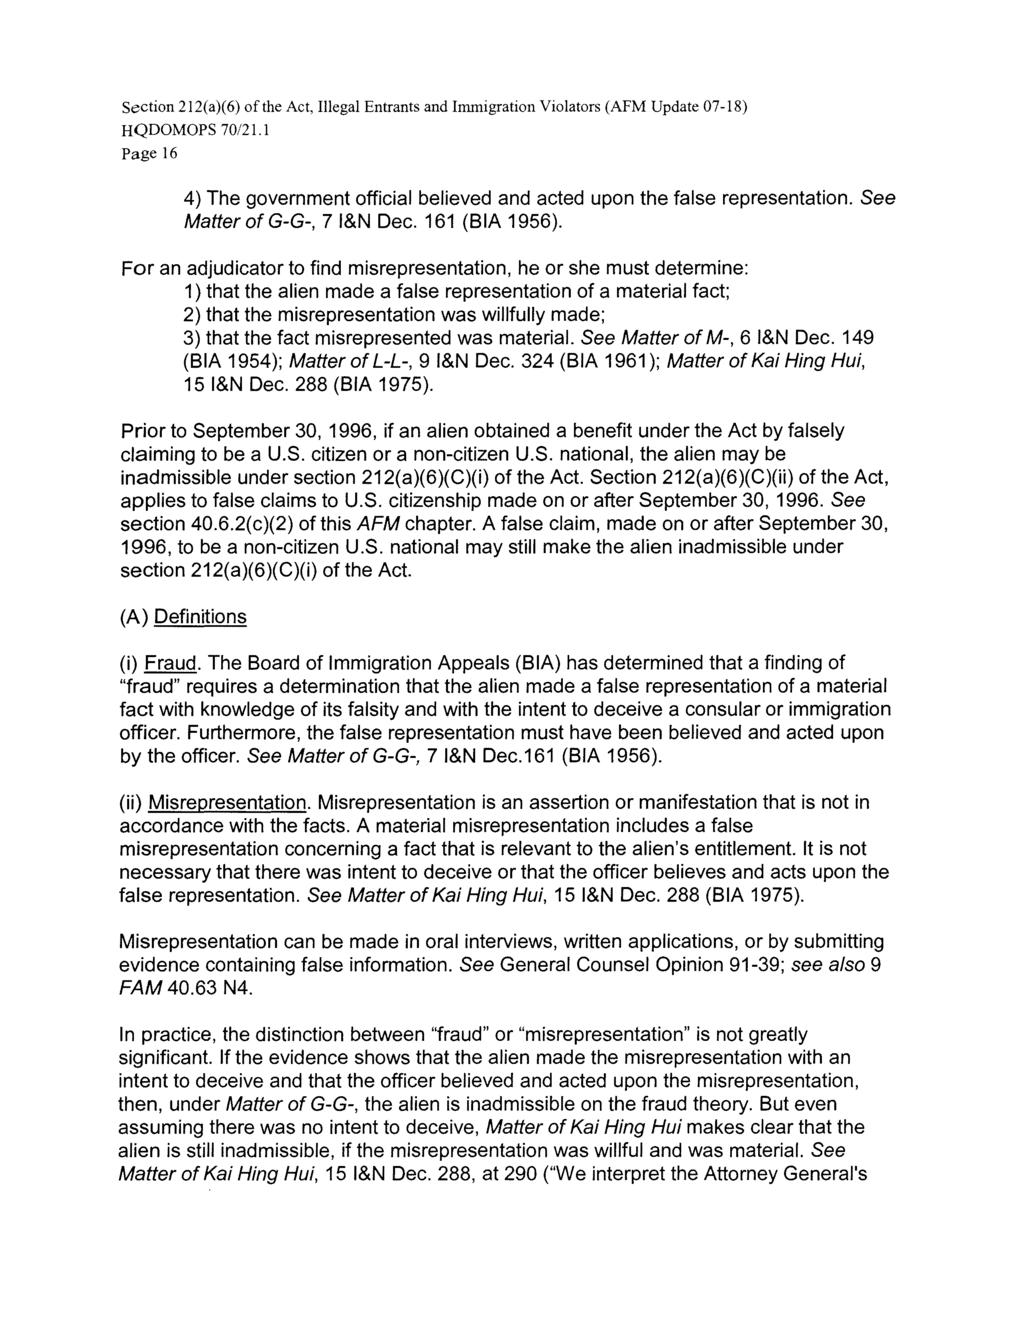 HQDOMOPS 70/21.1 Page 16 4) The government official believed and acted upon the false representation. See Matter of G-G-, 7 I&N Dec. 161 (BIA 1956).